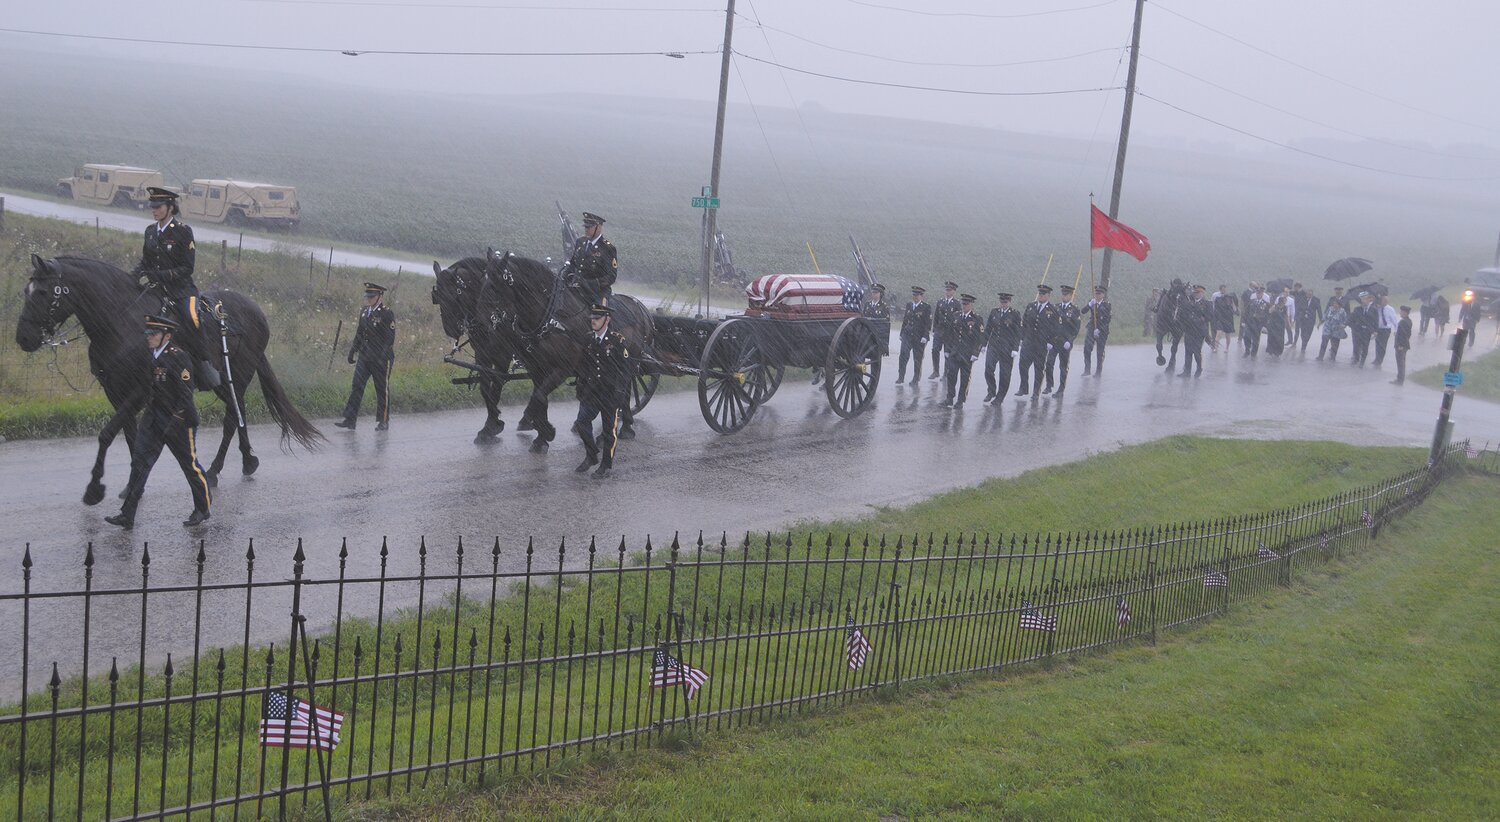 A caisson carries Richard "Dick" Chastain to his final resting place at Oakland Cemetery north of Elmdale. Members of Chastain's family walked behind the horse-drawn wagon.